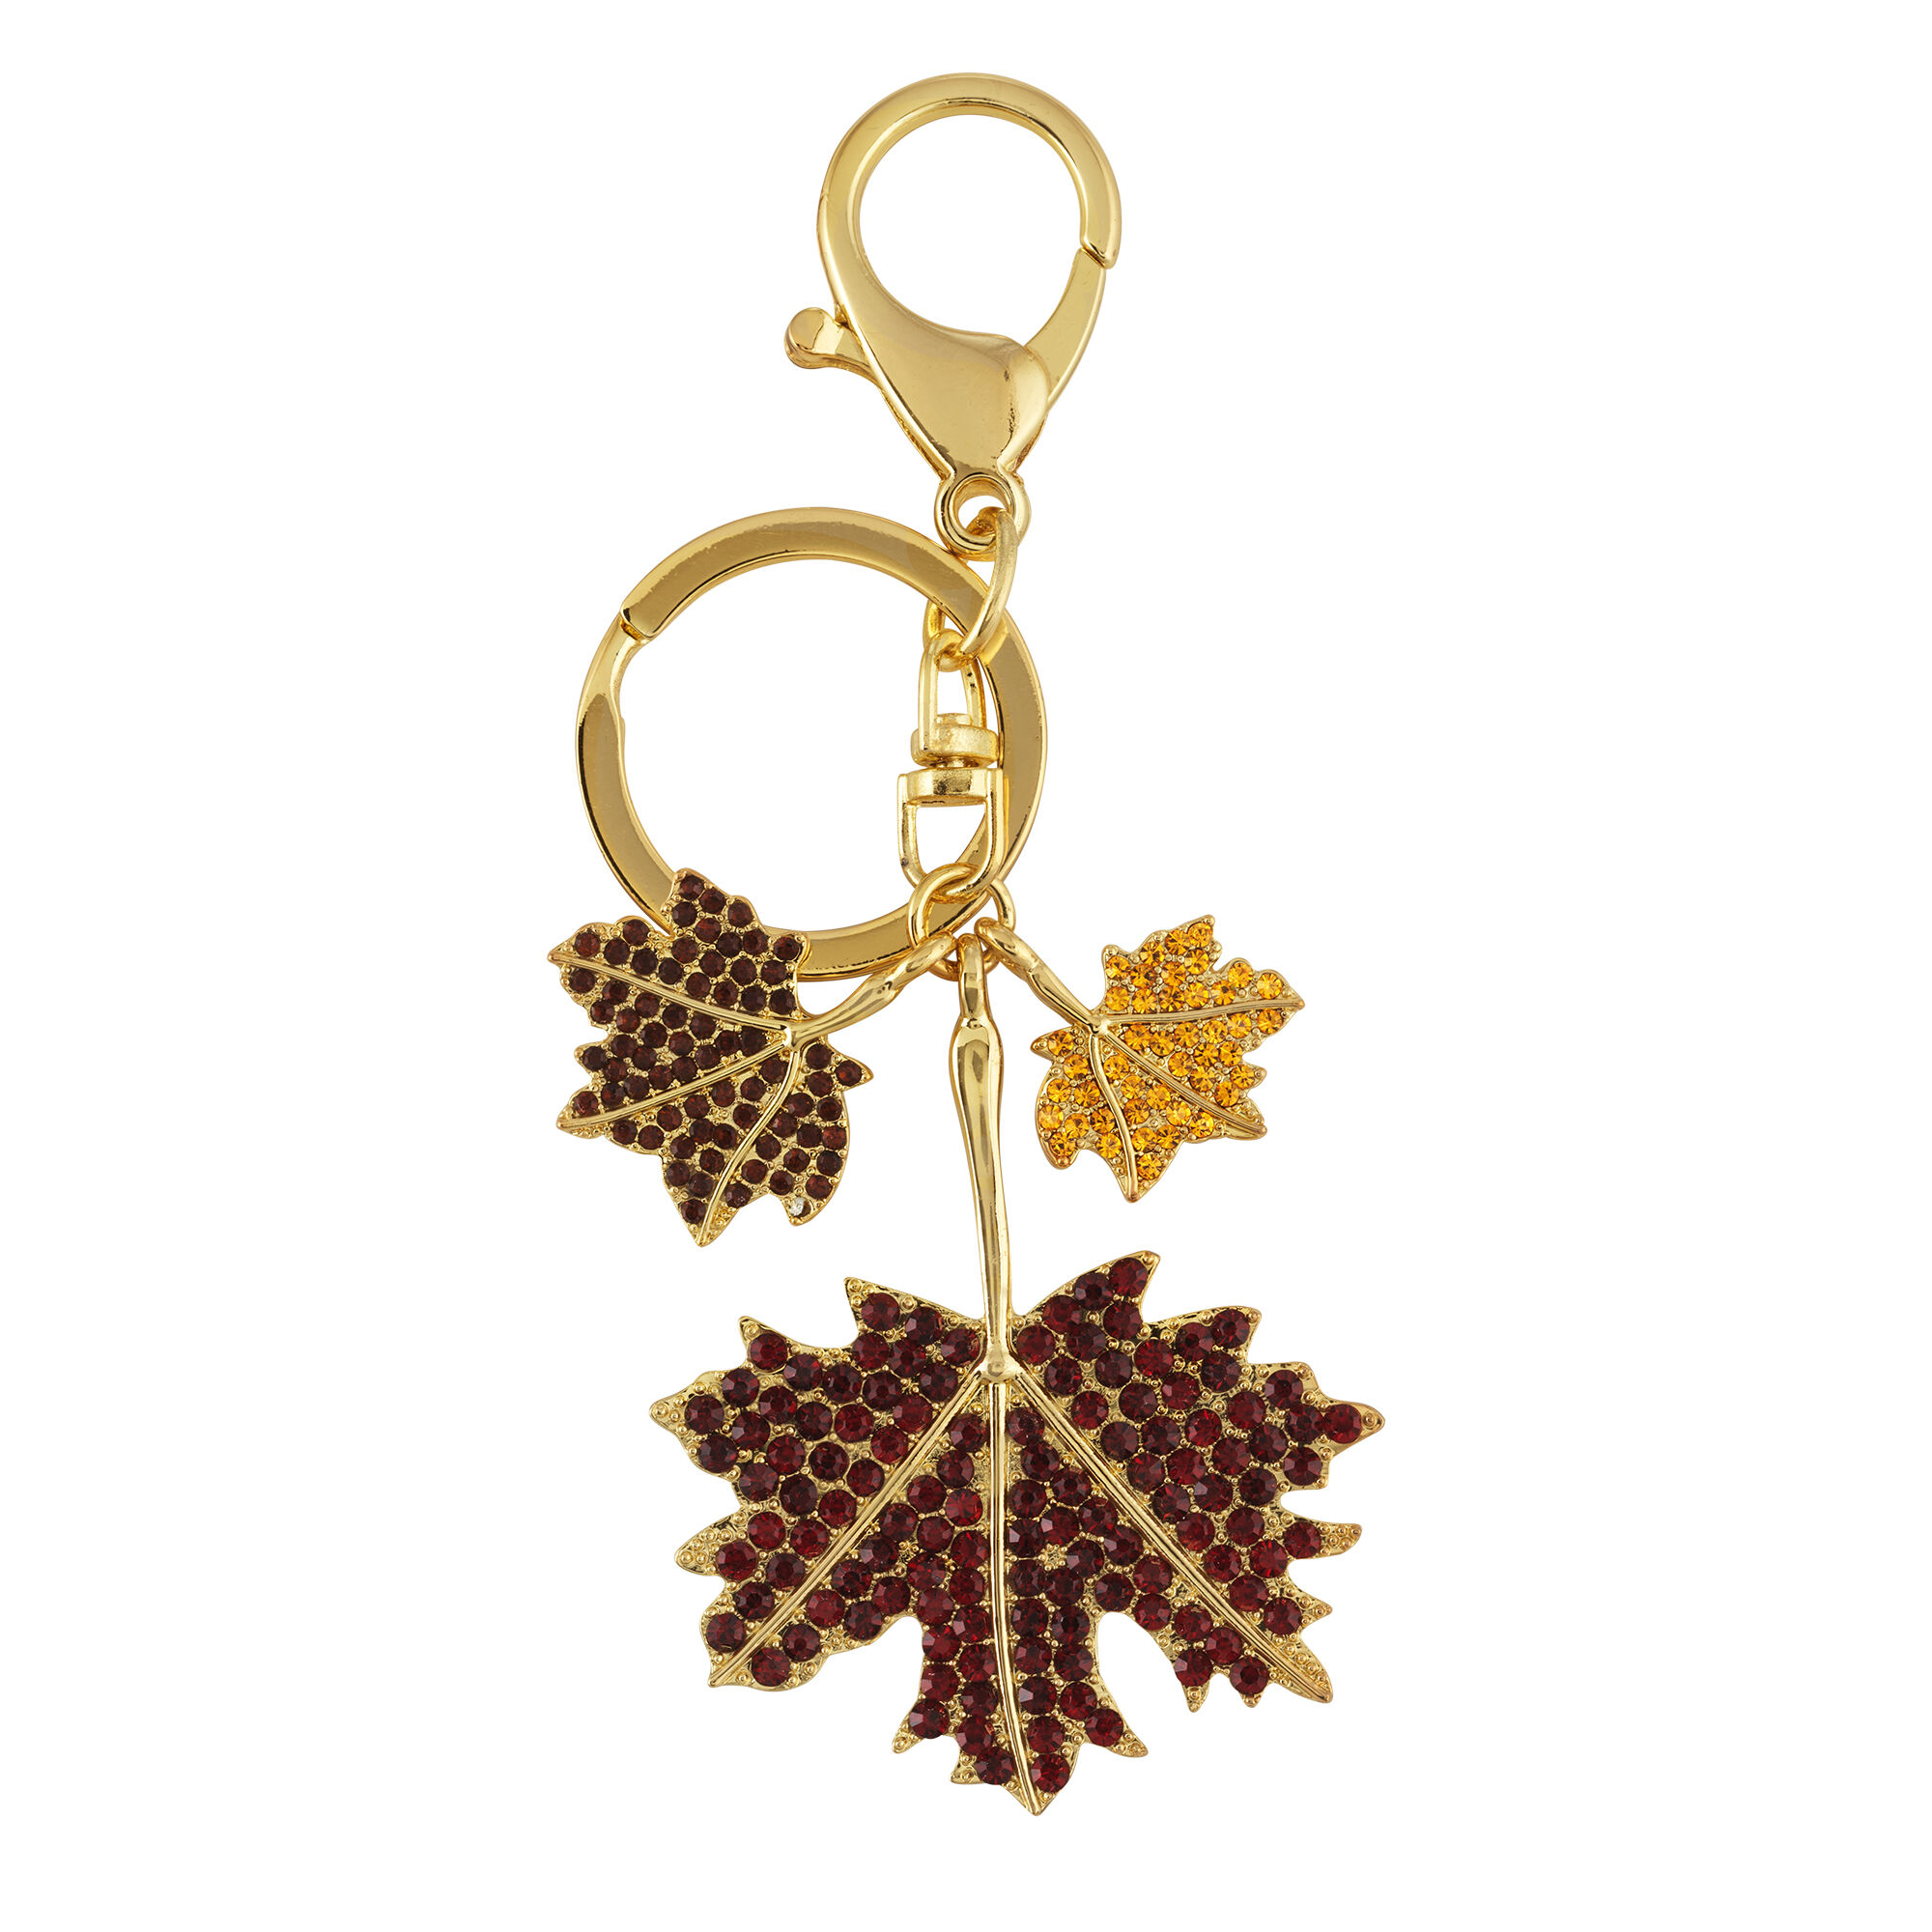 A Year of Cheer Keychains 10695 0017 h November